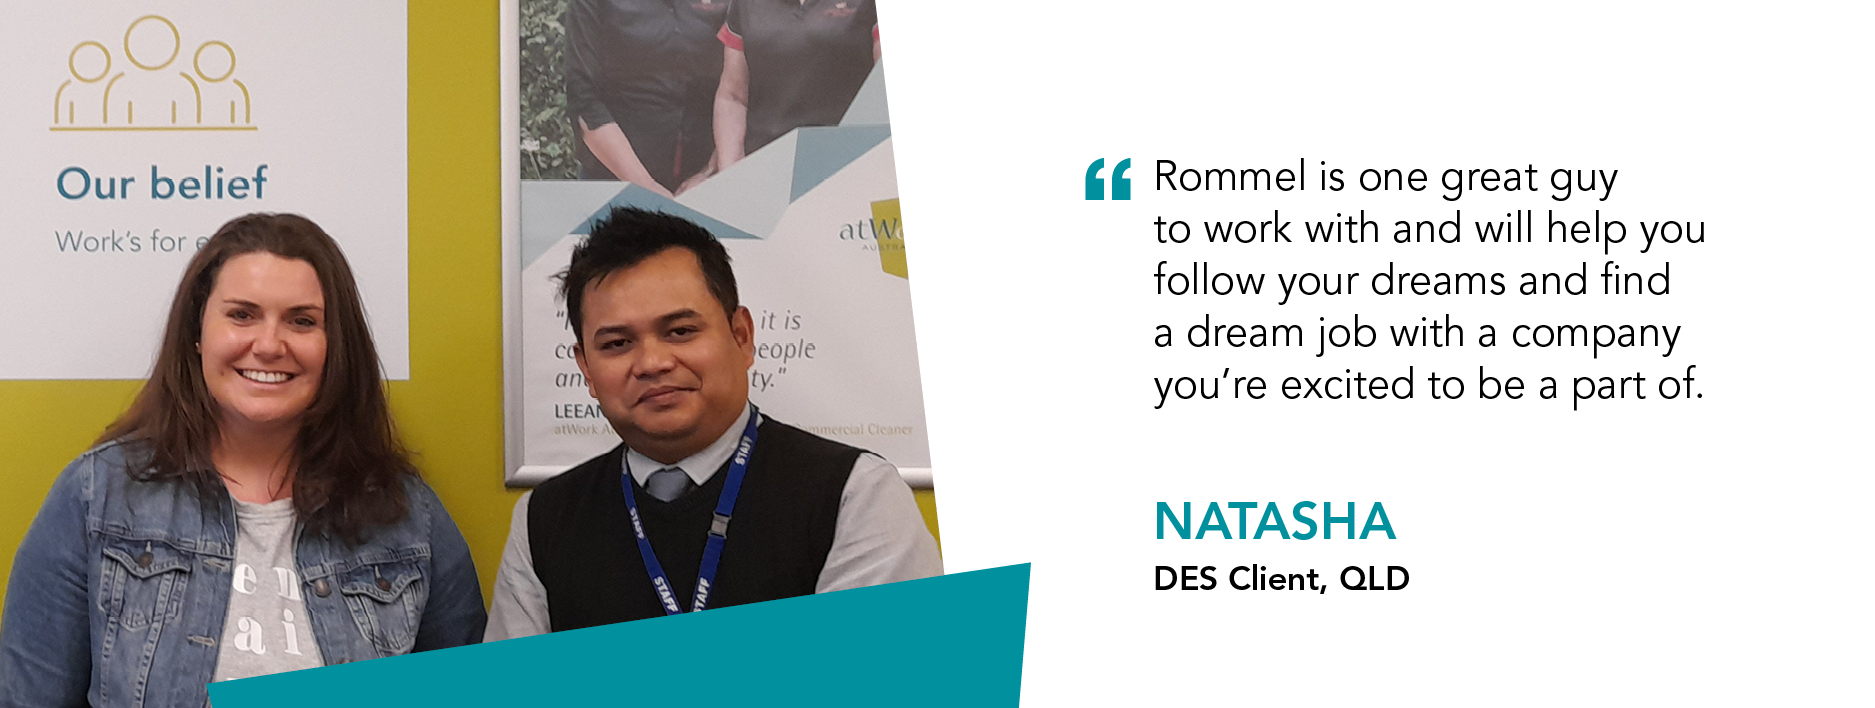 Quote reads Rommel is one great guy to work with and will help you follow your dreams and find a dream job with a company you're excited to be a part of. Natasha DES Client Queensland.